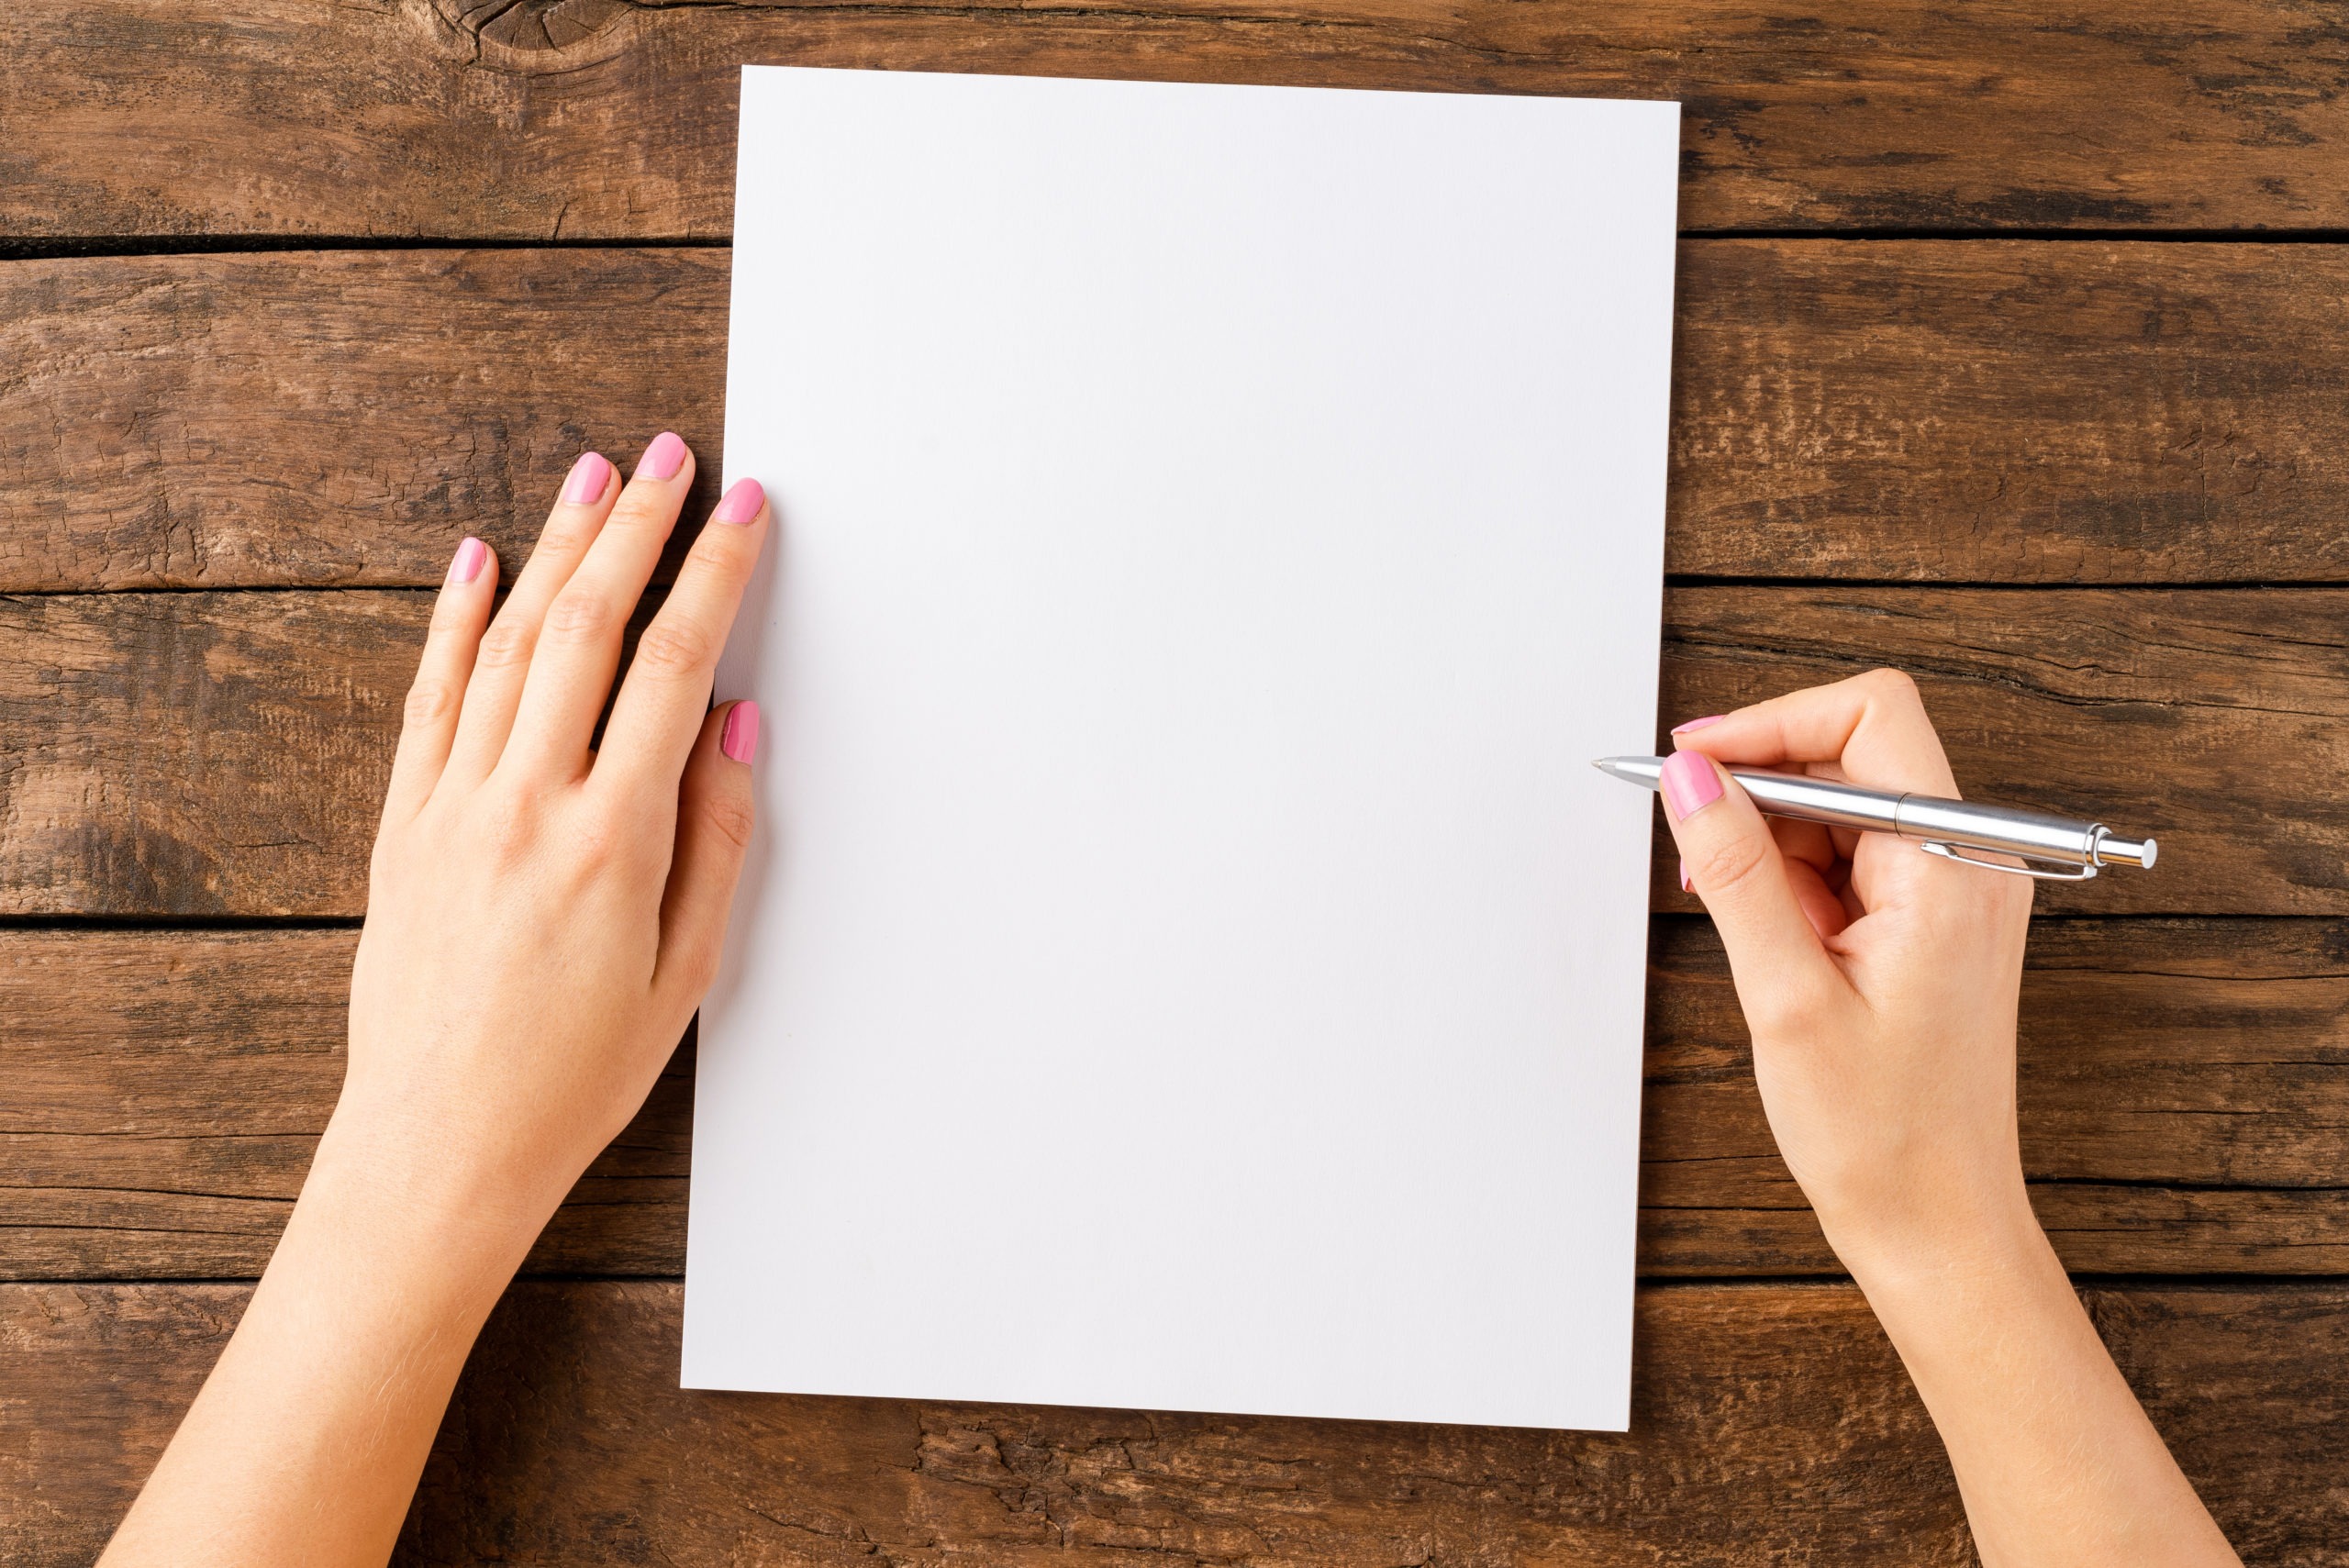 Woman’s hands writing with pen over blank white paper sheet on wooden table.